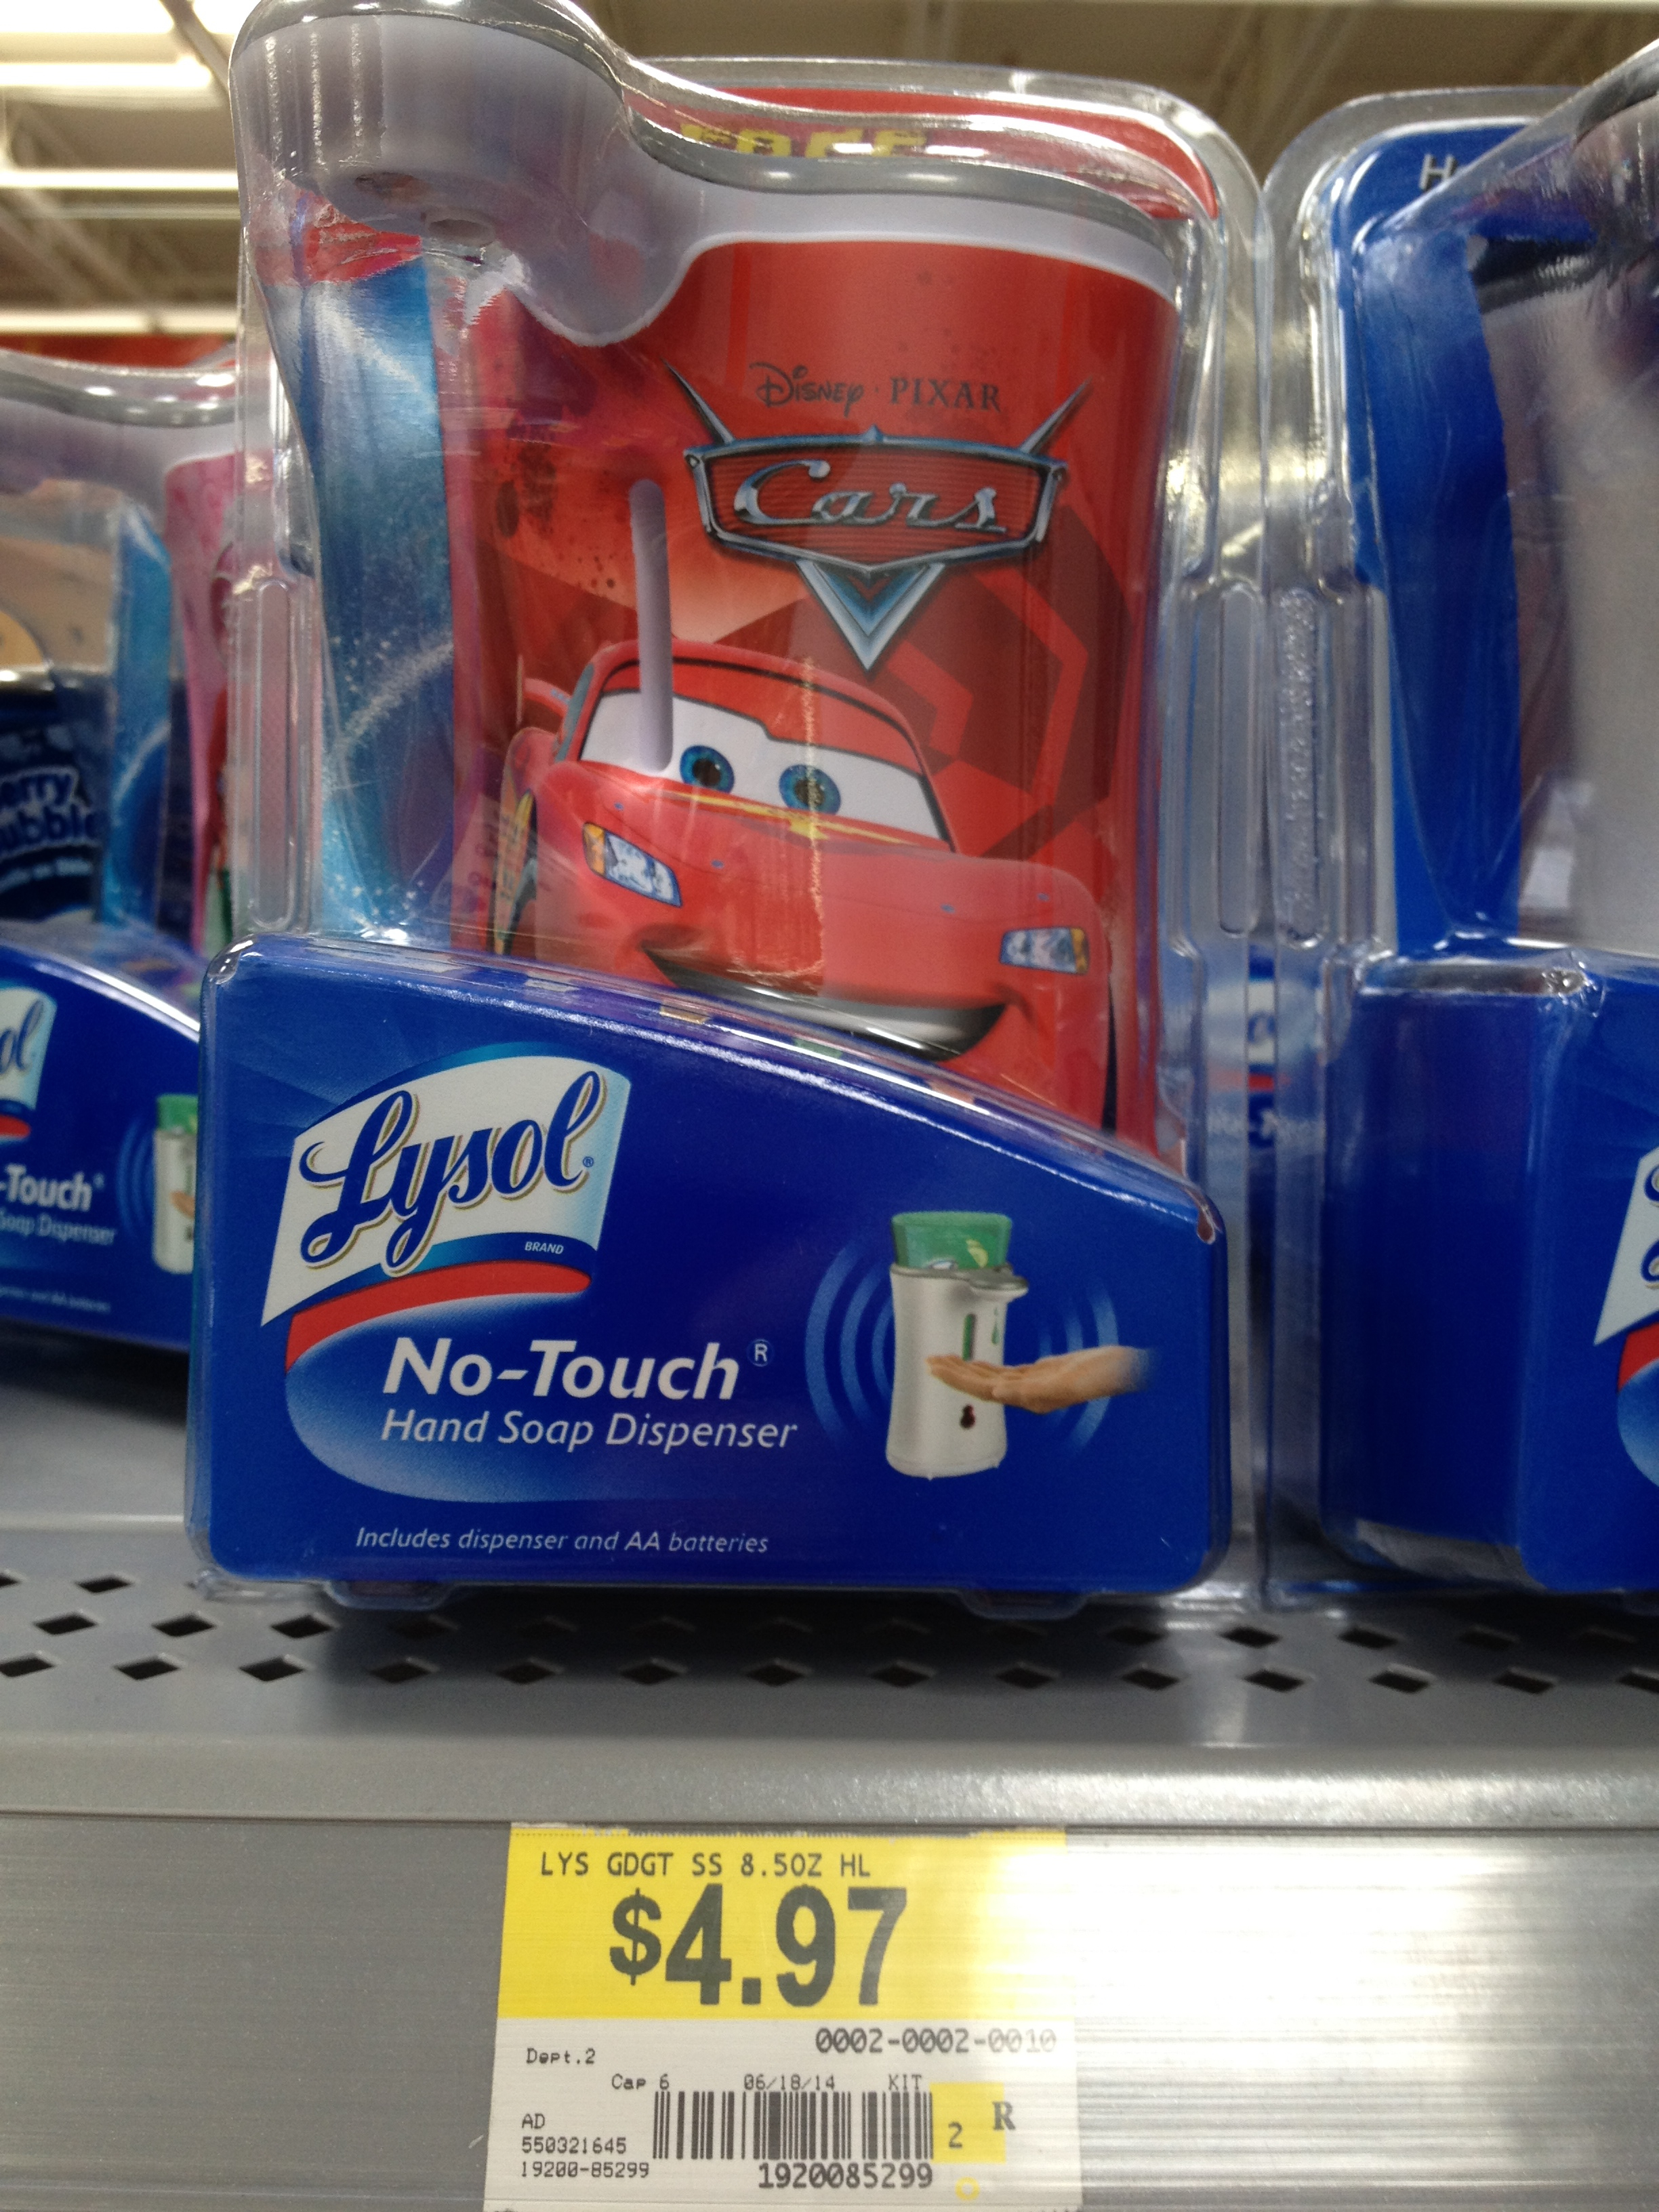 Free Lysol Automatic Hand Soap Dispenser At Walmart ~ Reminder - Lysol Hands Free Soap Dispenser Printable Coupon